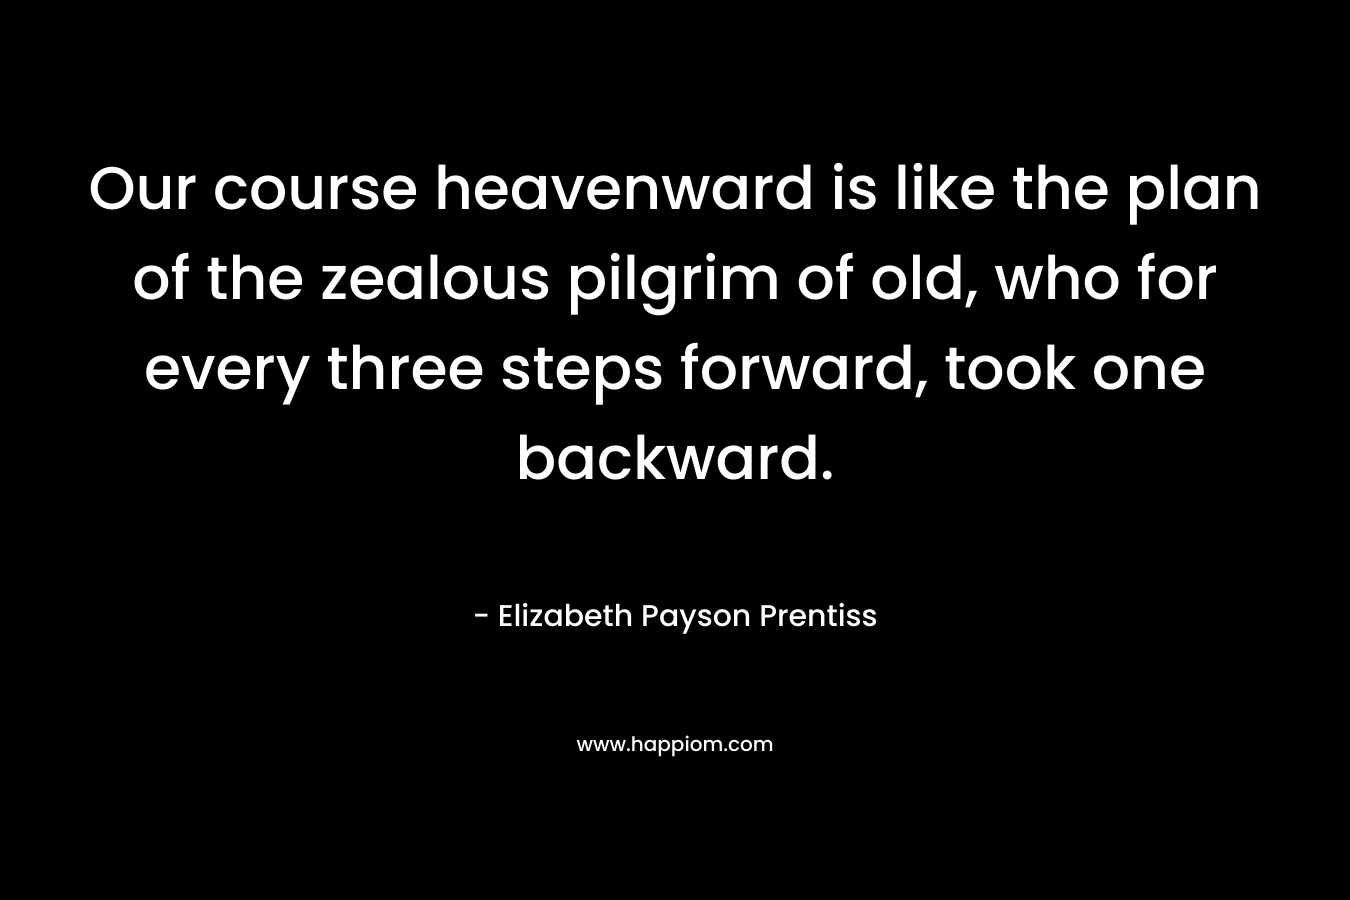 Our course heavenward is like the plan of the zealous pilgrim of old, who for every three steps forward, took one backward. – Elizabeth Payson Prentiss